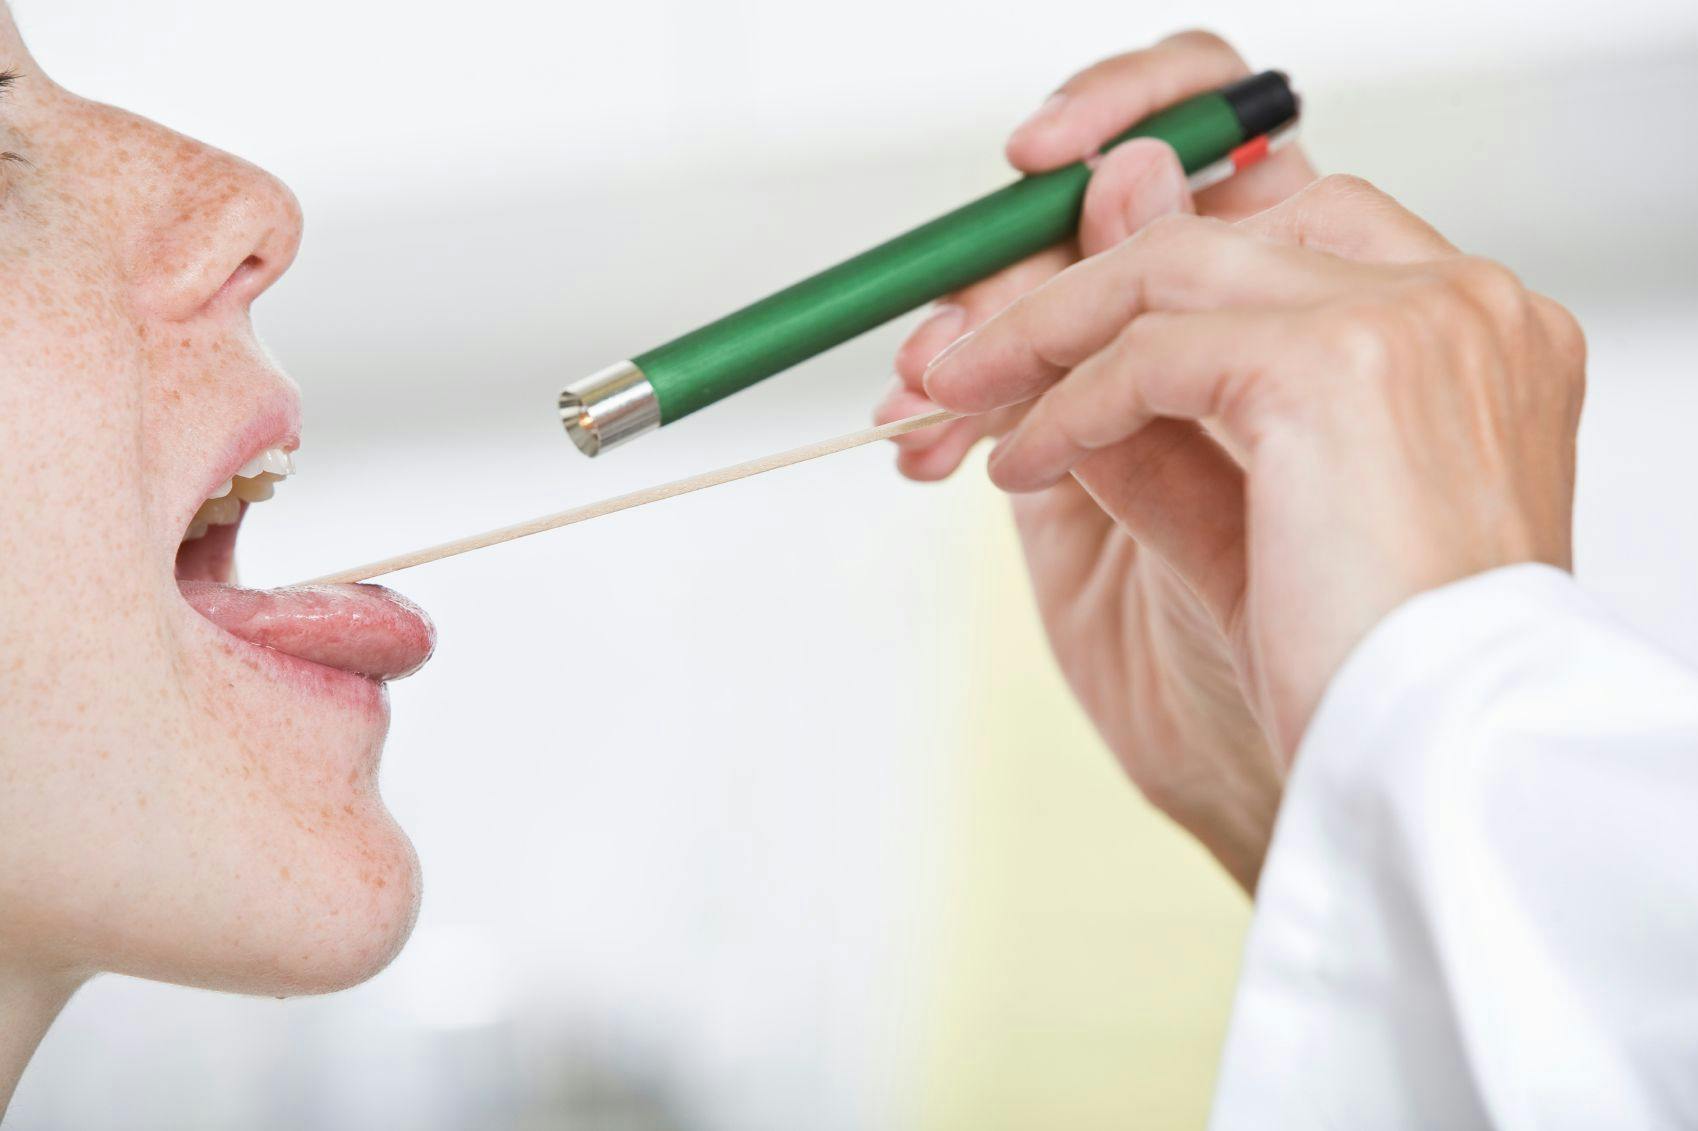 Study: Antibiotics Are Often Prescribed for Sore Throats Without a Diagnostic Test